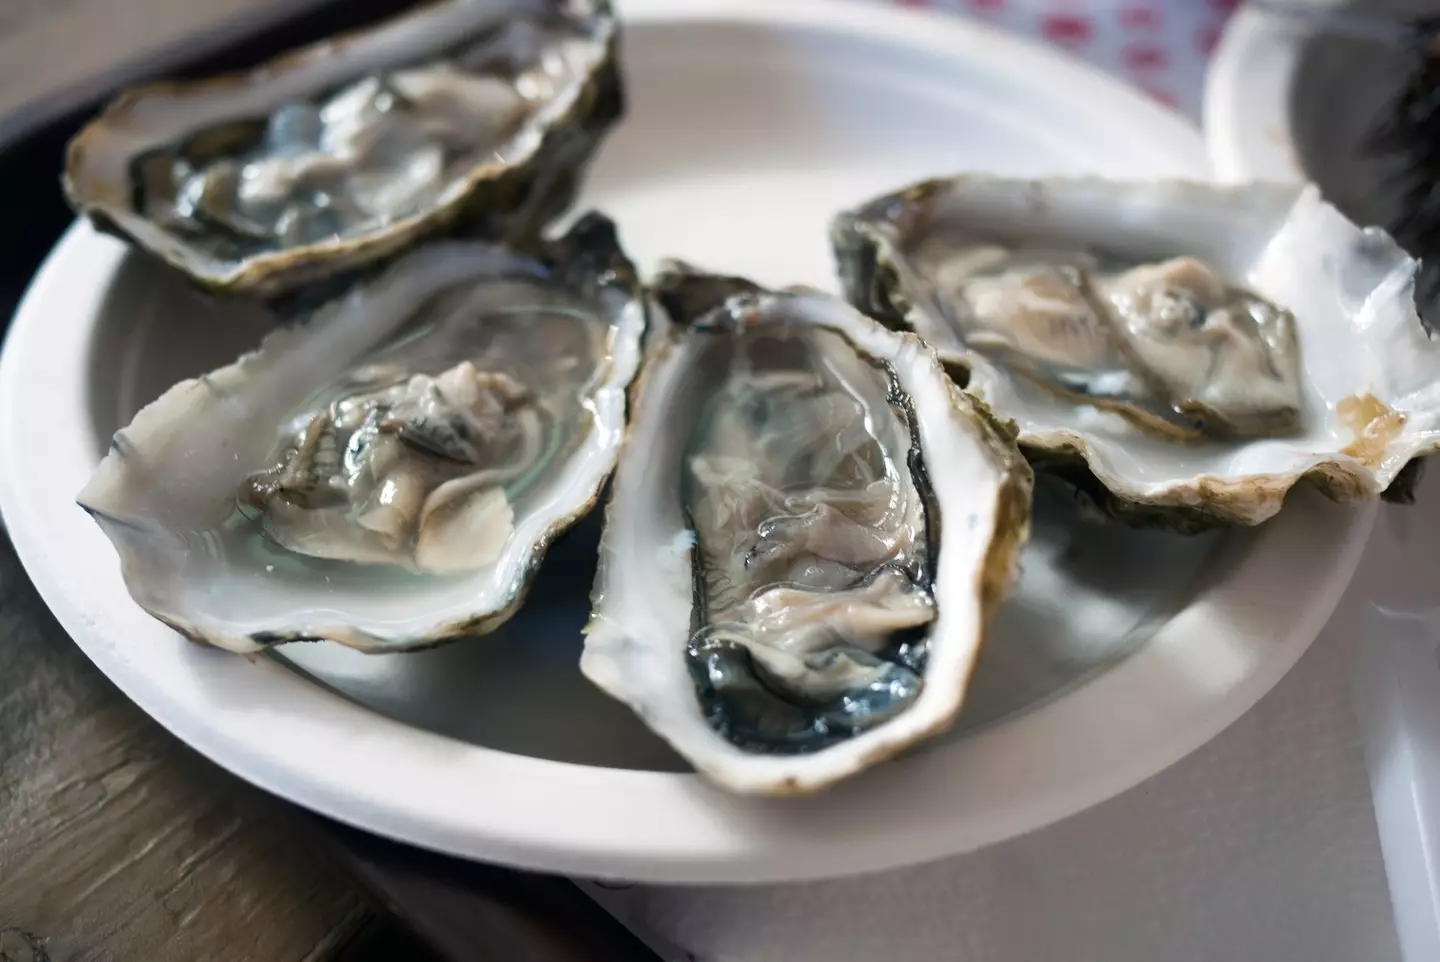 A man in his 30s has died after eating raw oysters at a Texas restaurant.